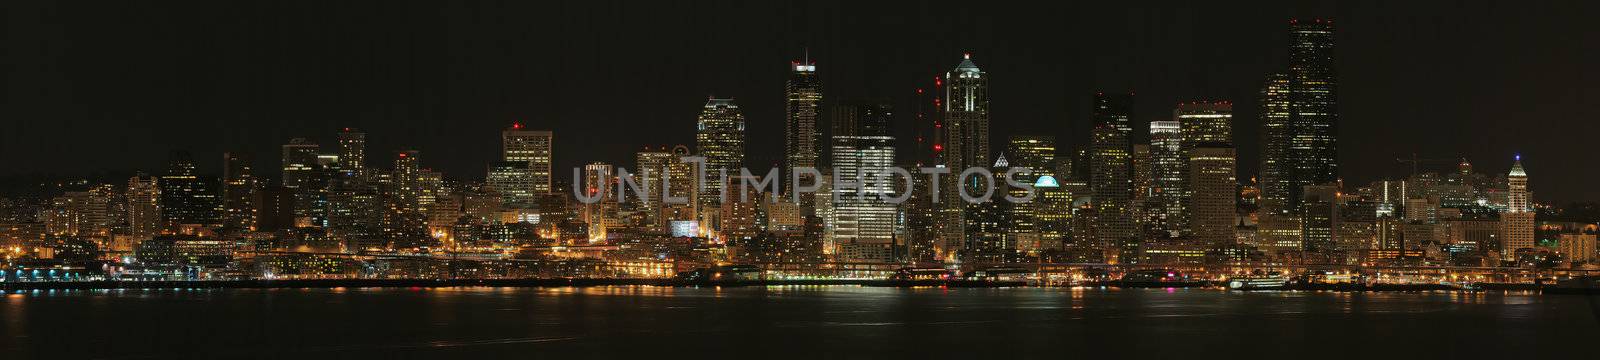 Seattle at Night by LoonChild